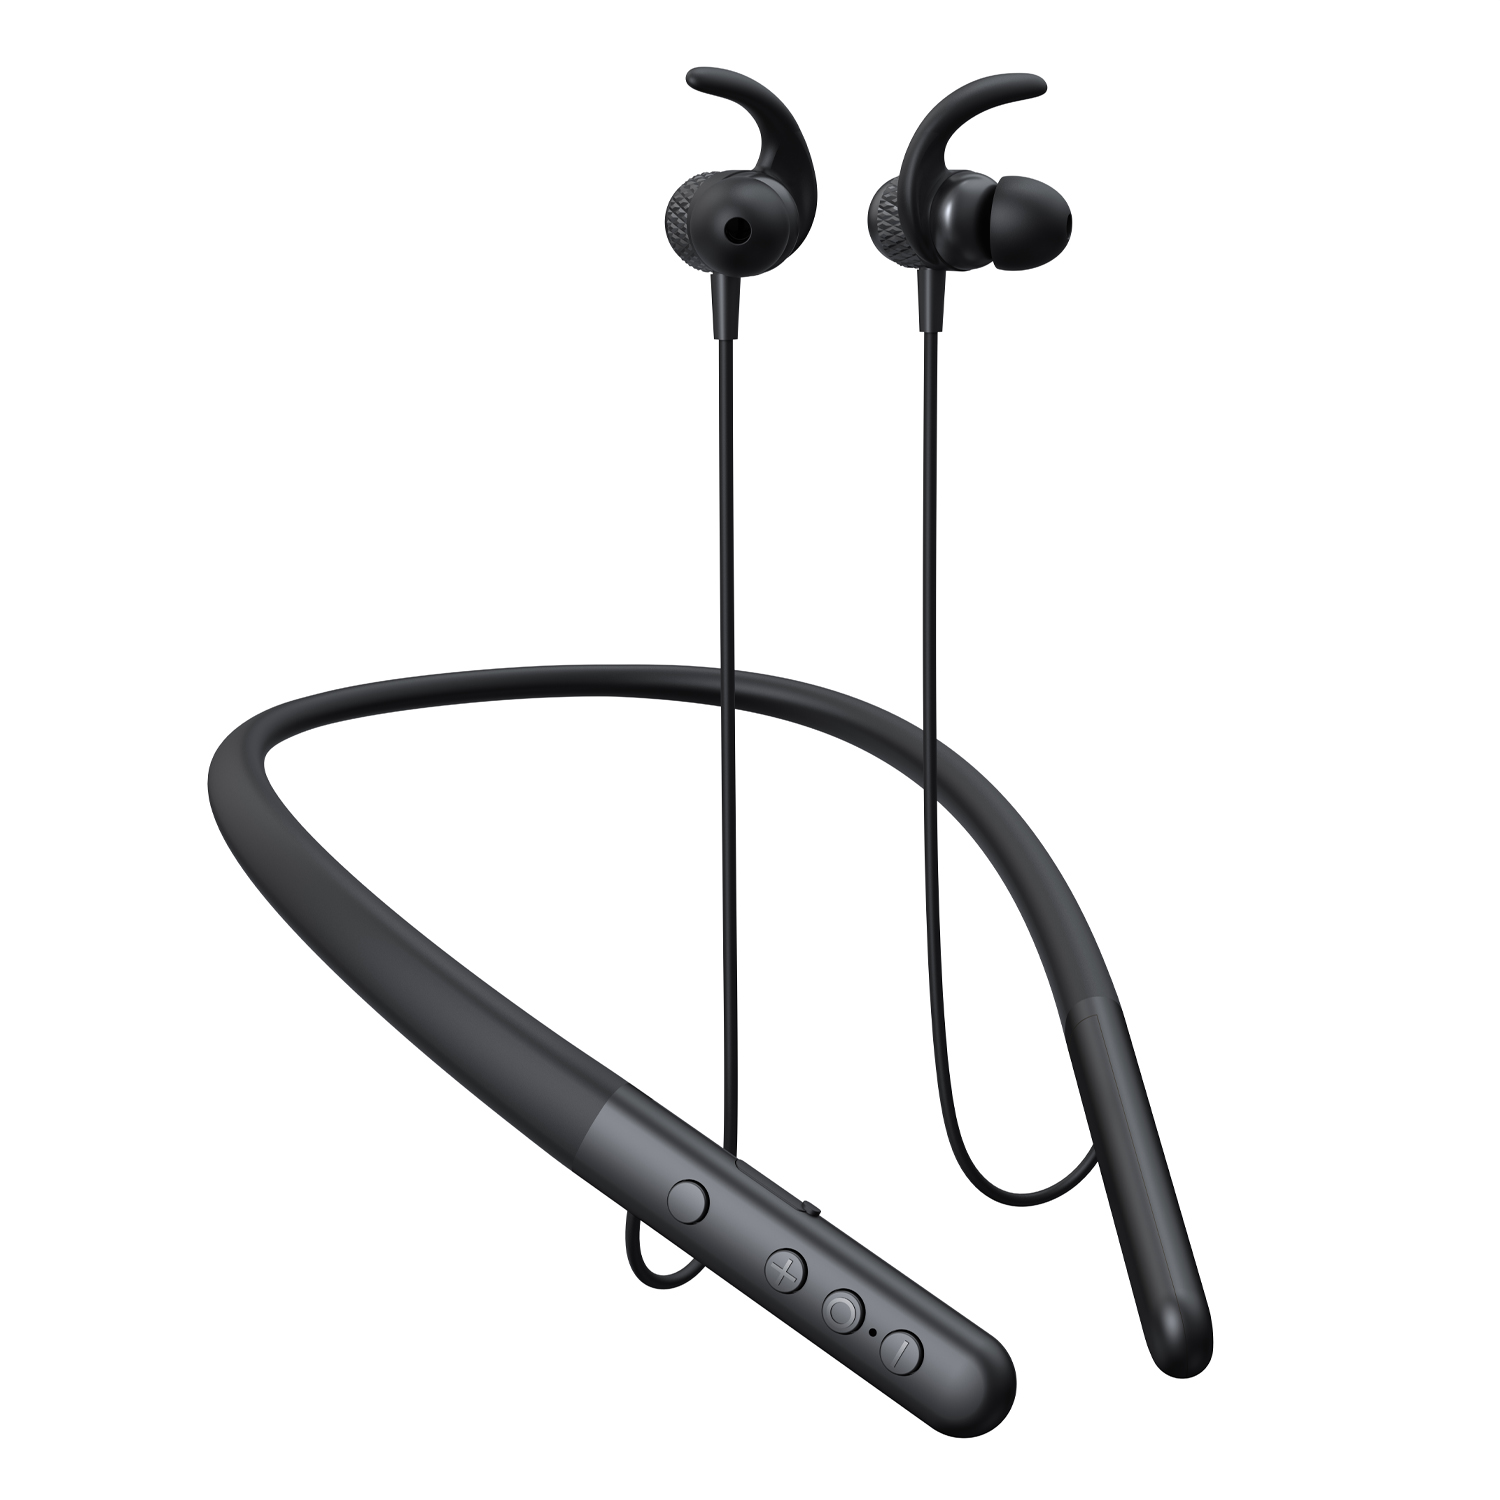 Seeken Soundbreeze Serenity Wireless Extra Bass In-Ear Headphones with 40 Hours Battery Life, Bluetooth Ver 5.3, Headset with Mic for Phone Calls - Black